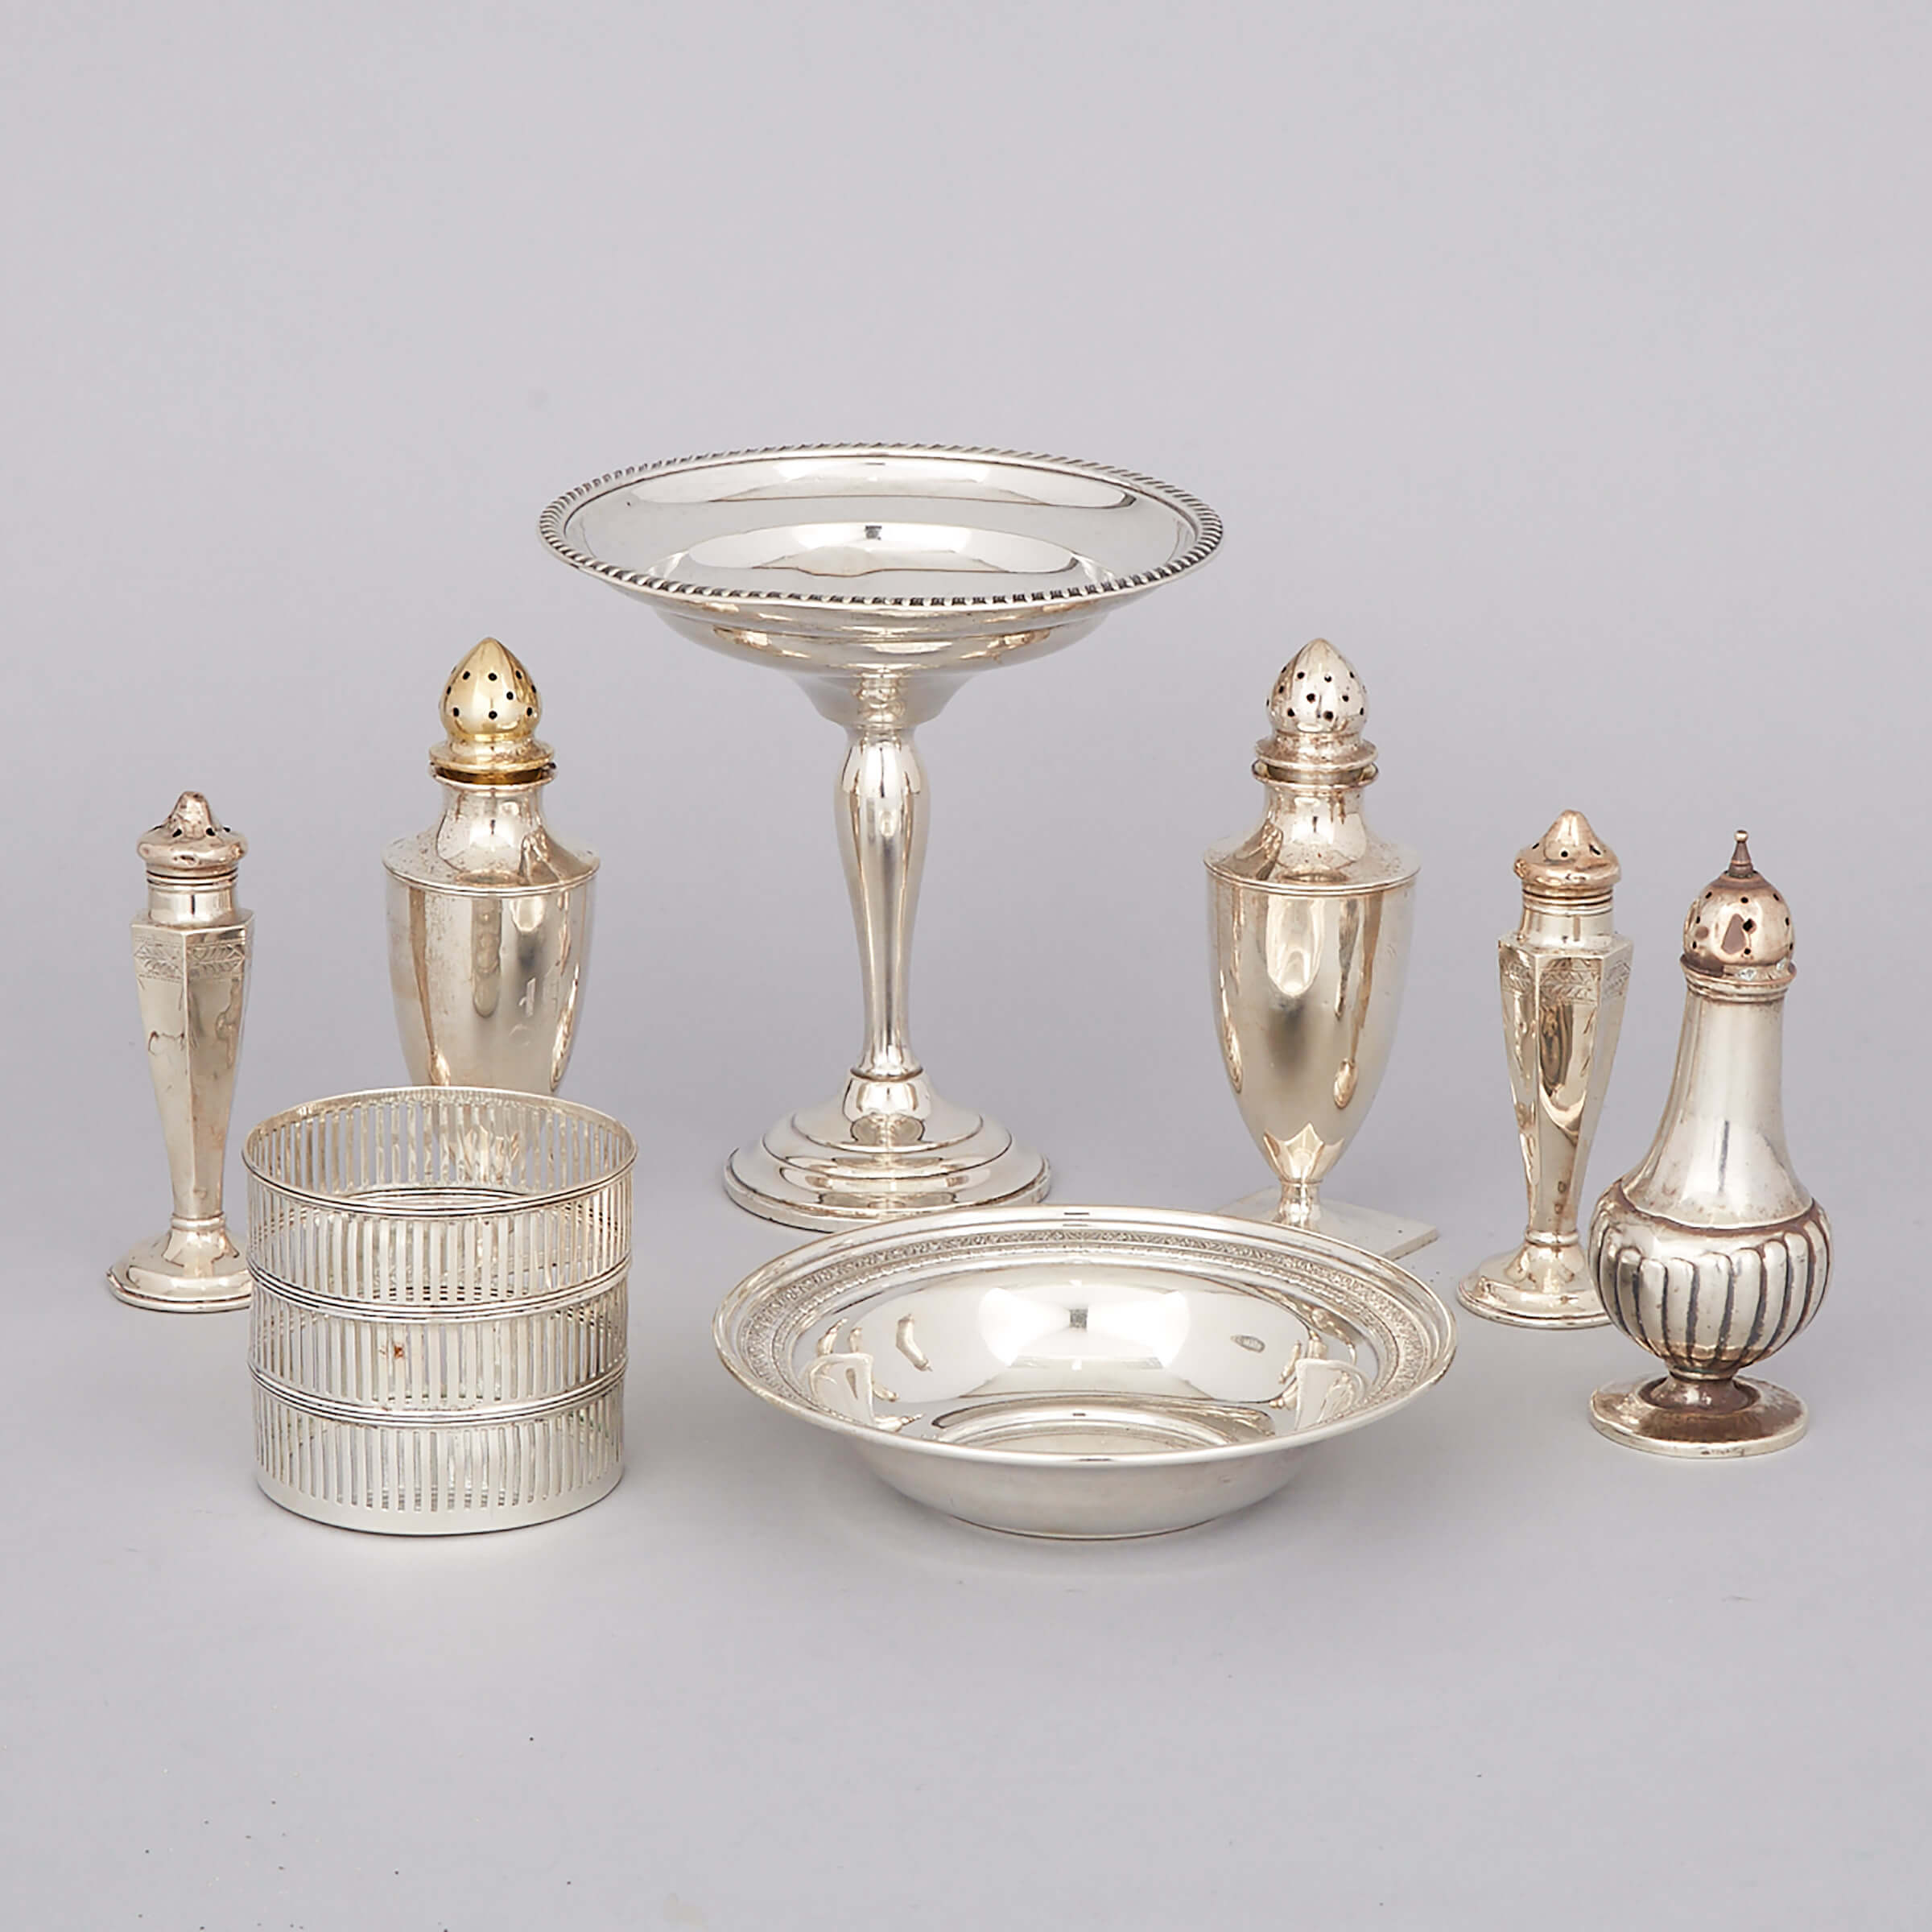 Group of American Silver Articles, 20th century